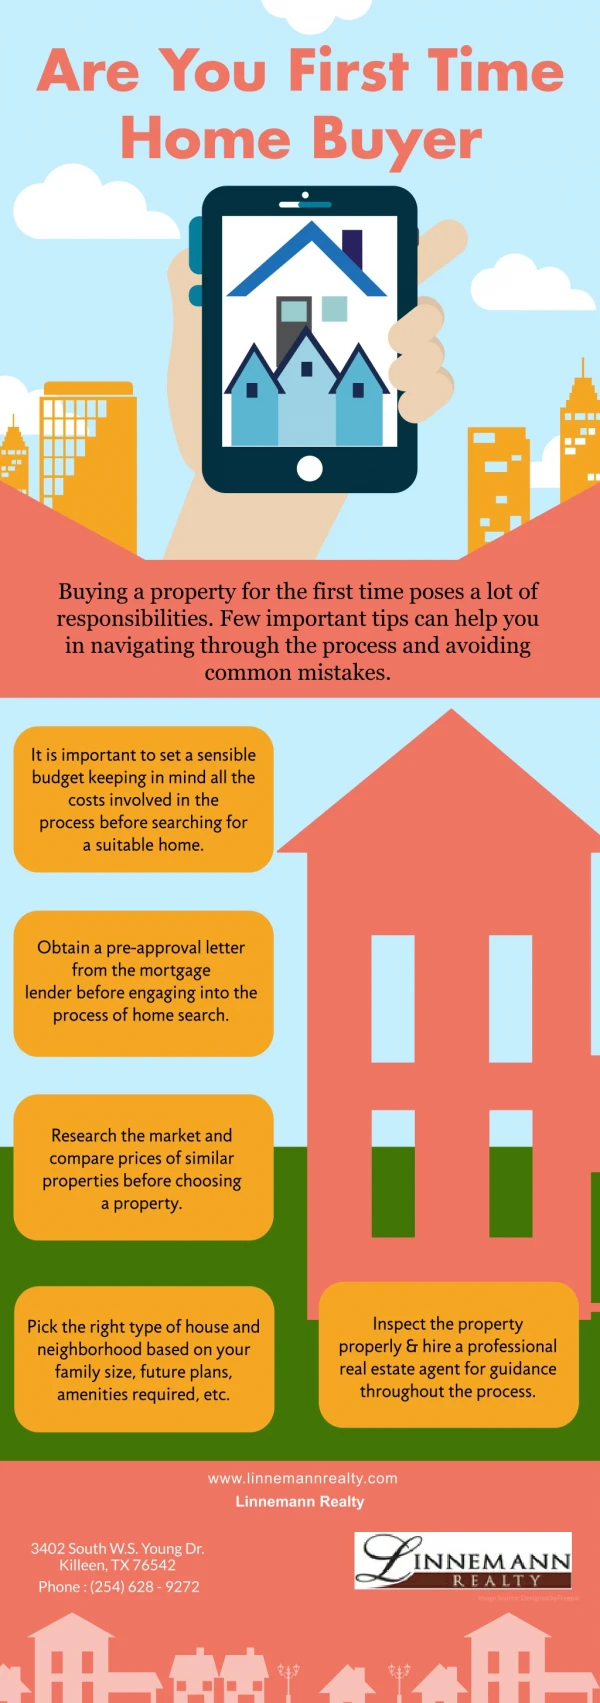 Are You First Time Home Buyer